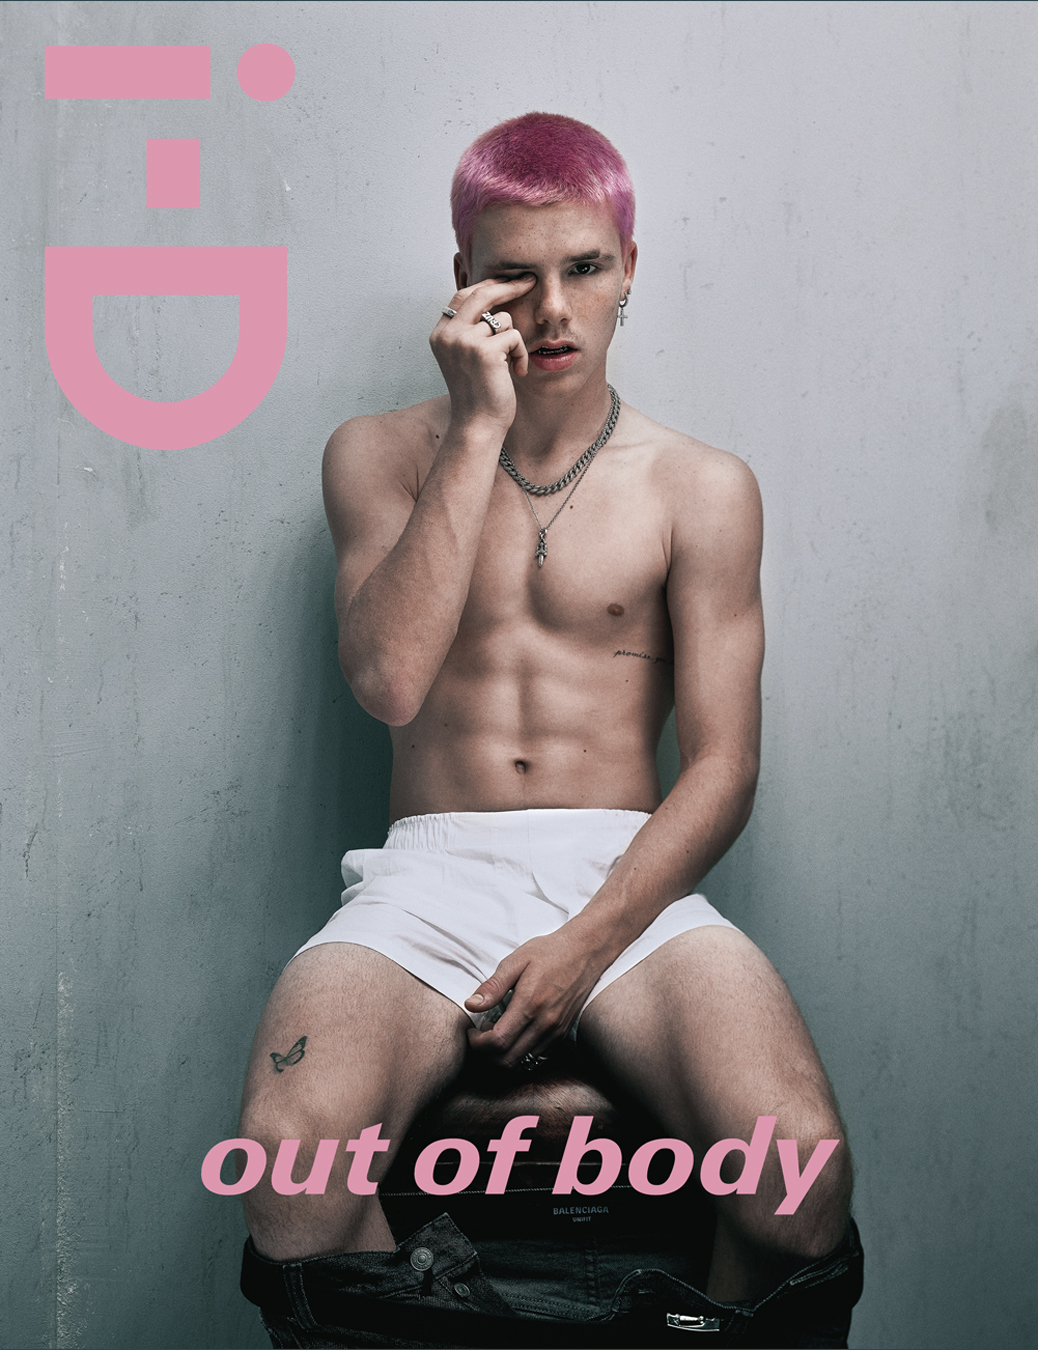 Cruz Beckham on the cover of i-D 367 The Out Of Body Issue 